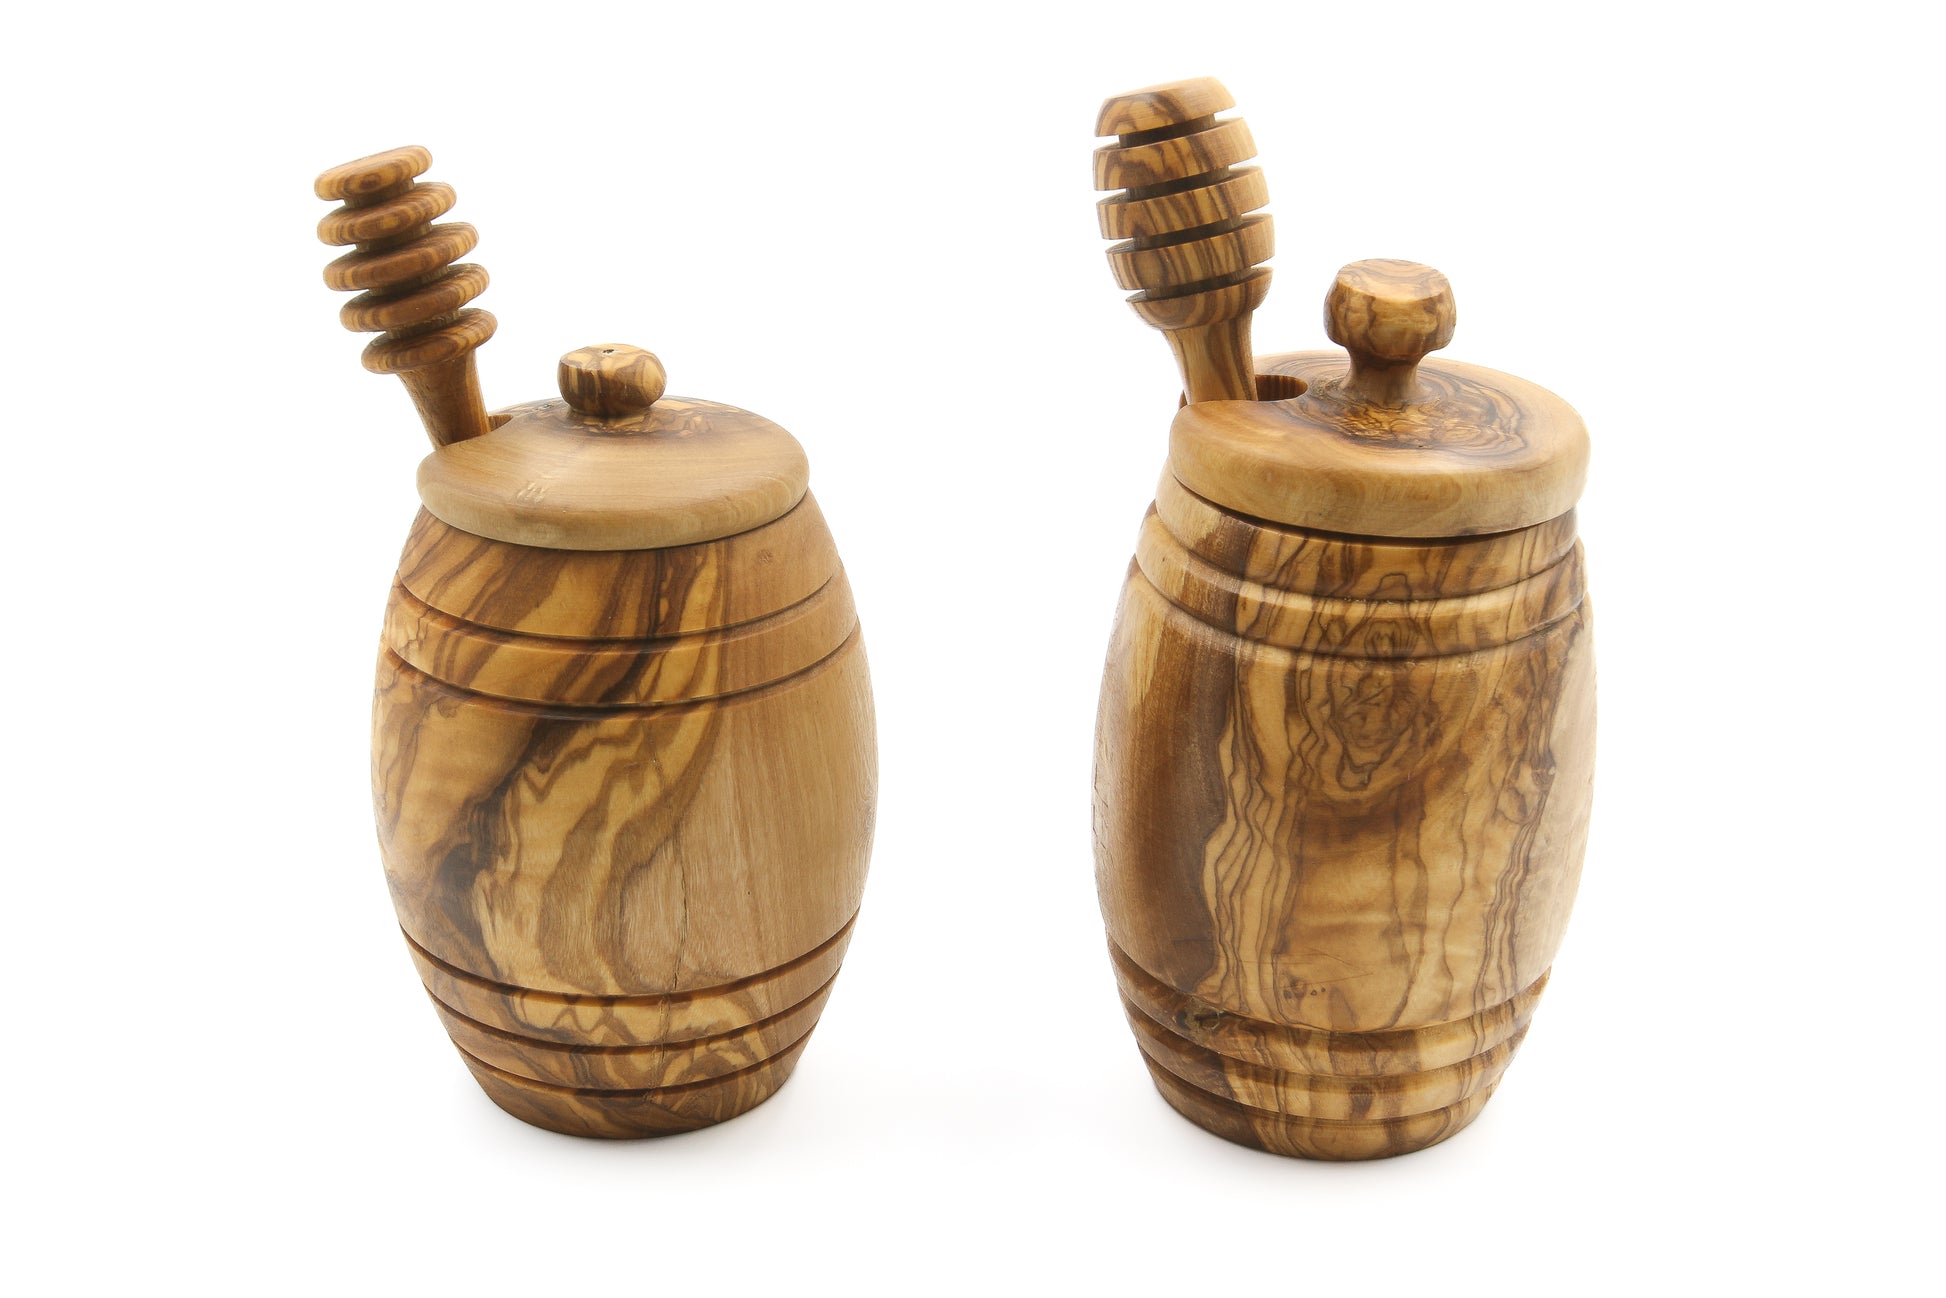 Unique olive wood kitchen accessory for storing and serving honey